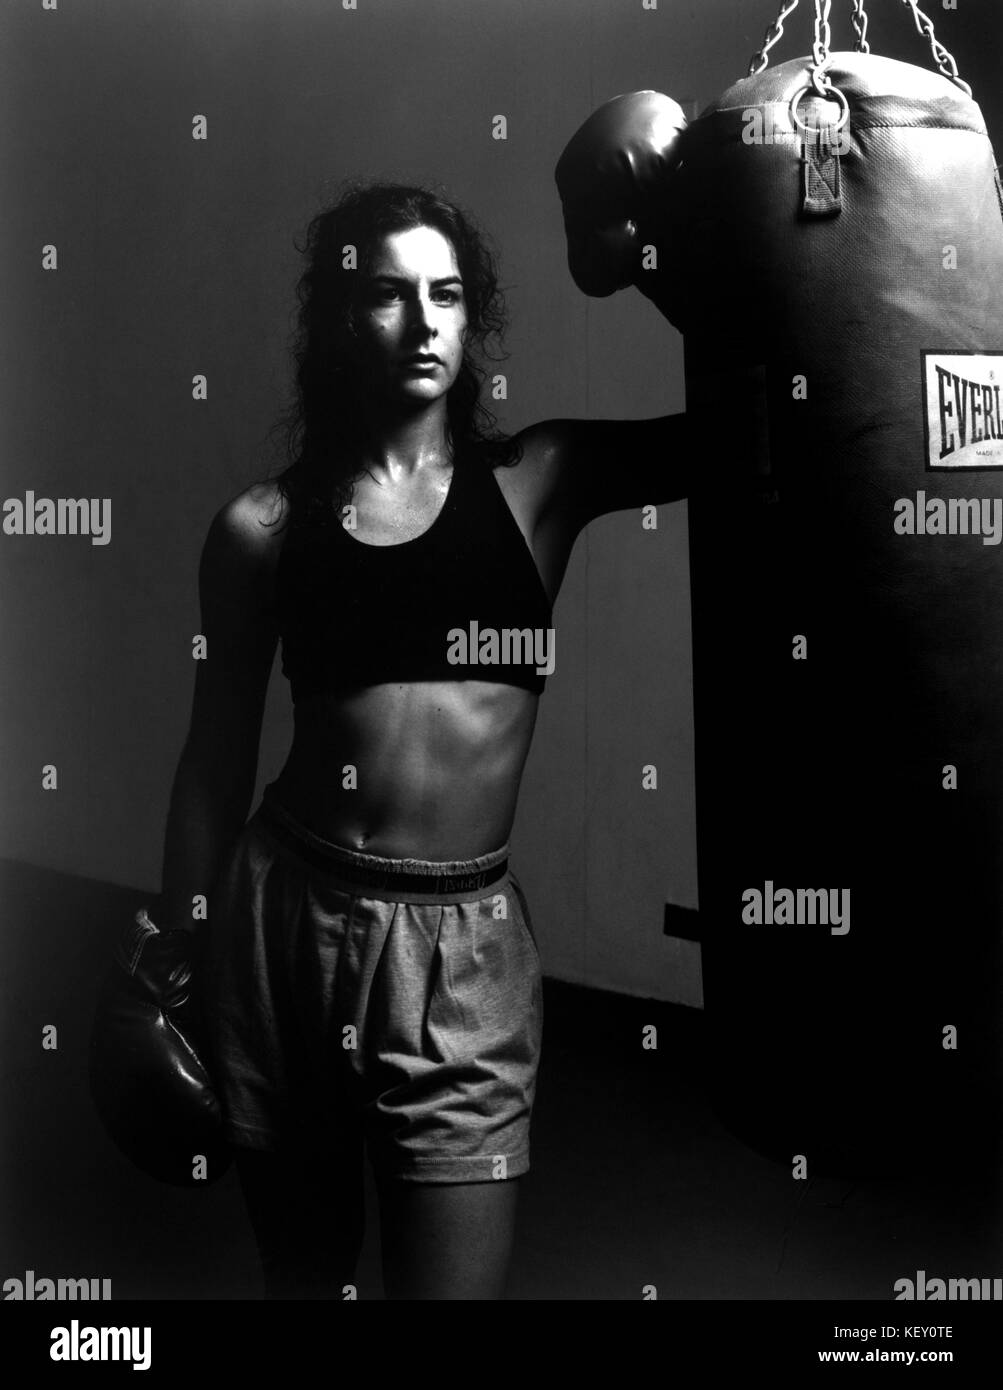 Woman/Girl in boxing gym after workout Stock Photo